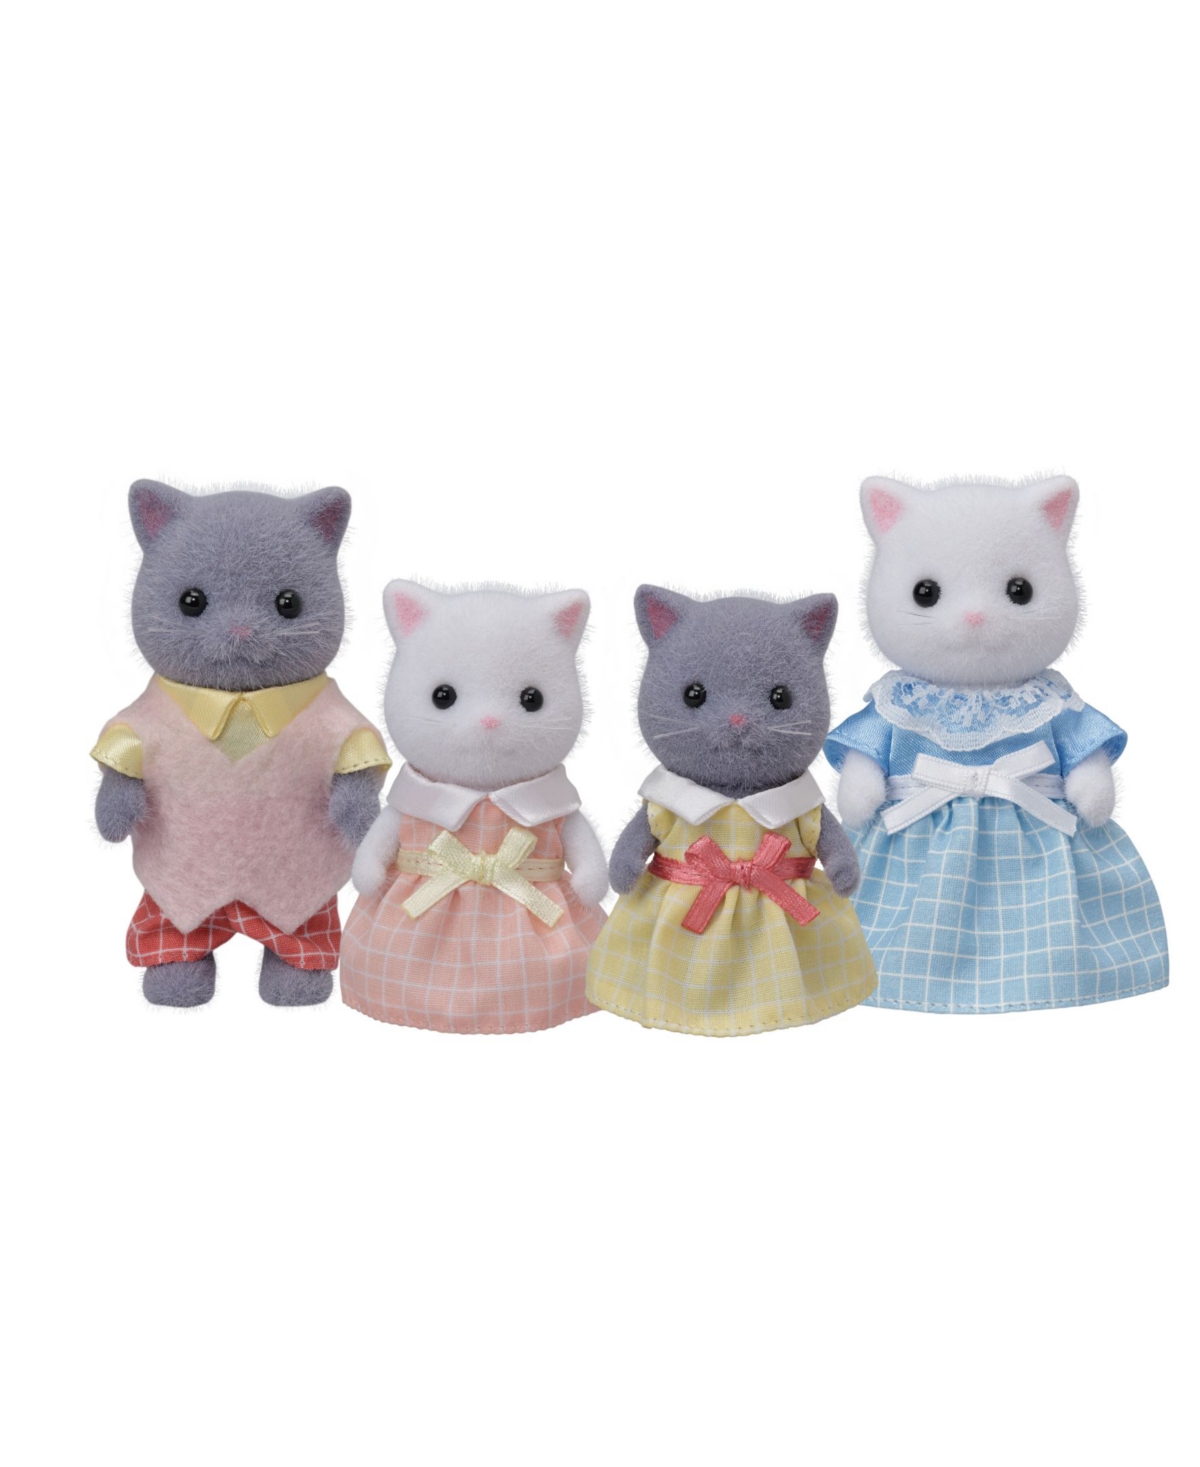 Epoch Everlasting Play Kids' Calico Critters Persian Cat Family In Multi